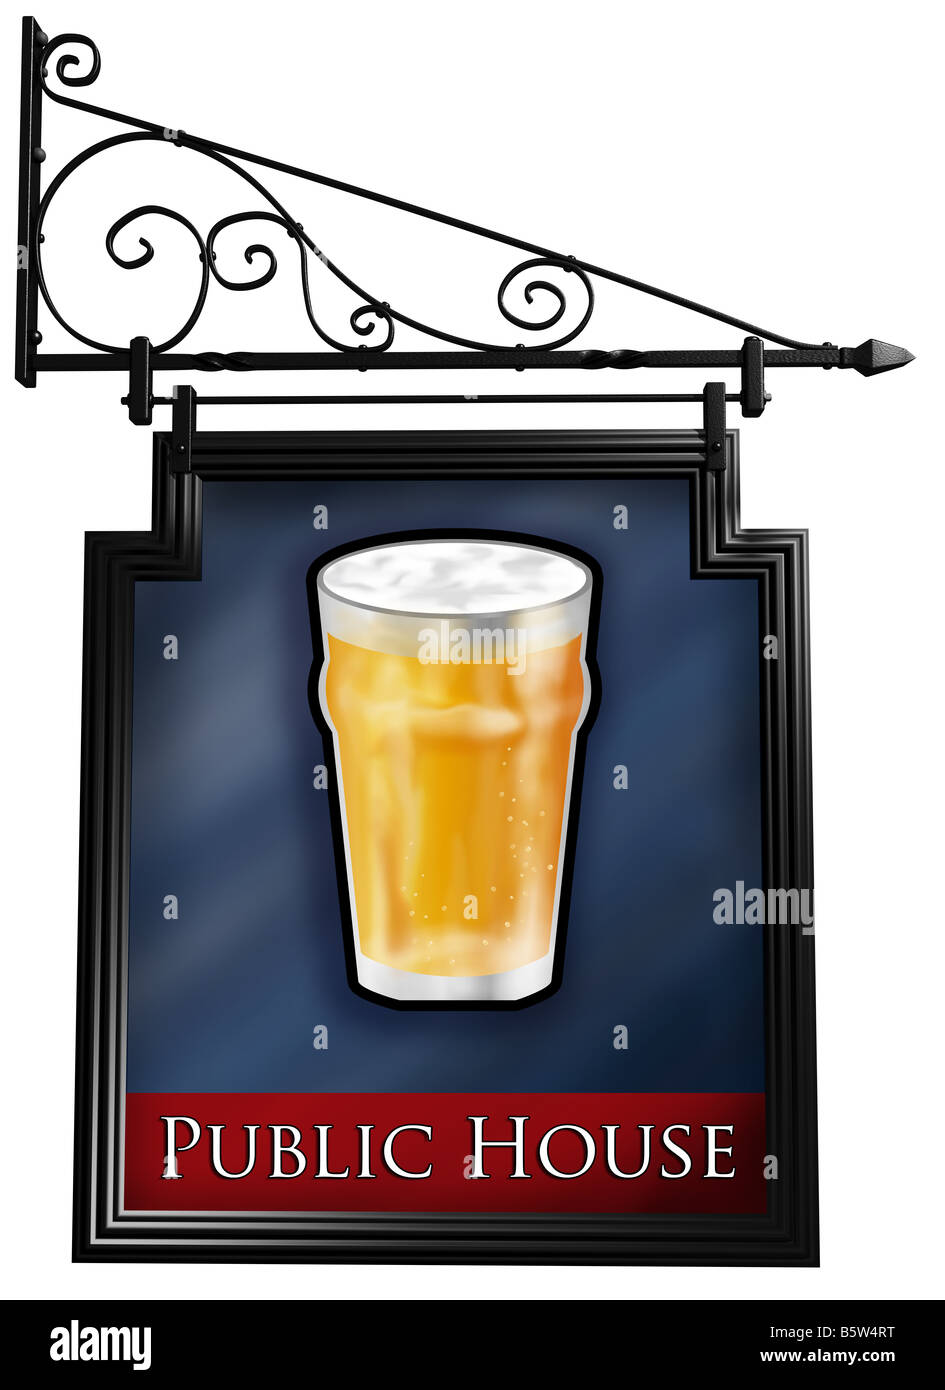 Illustration of an isolated antique style pub sign Stock Photo